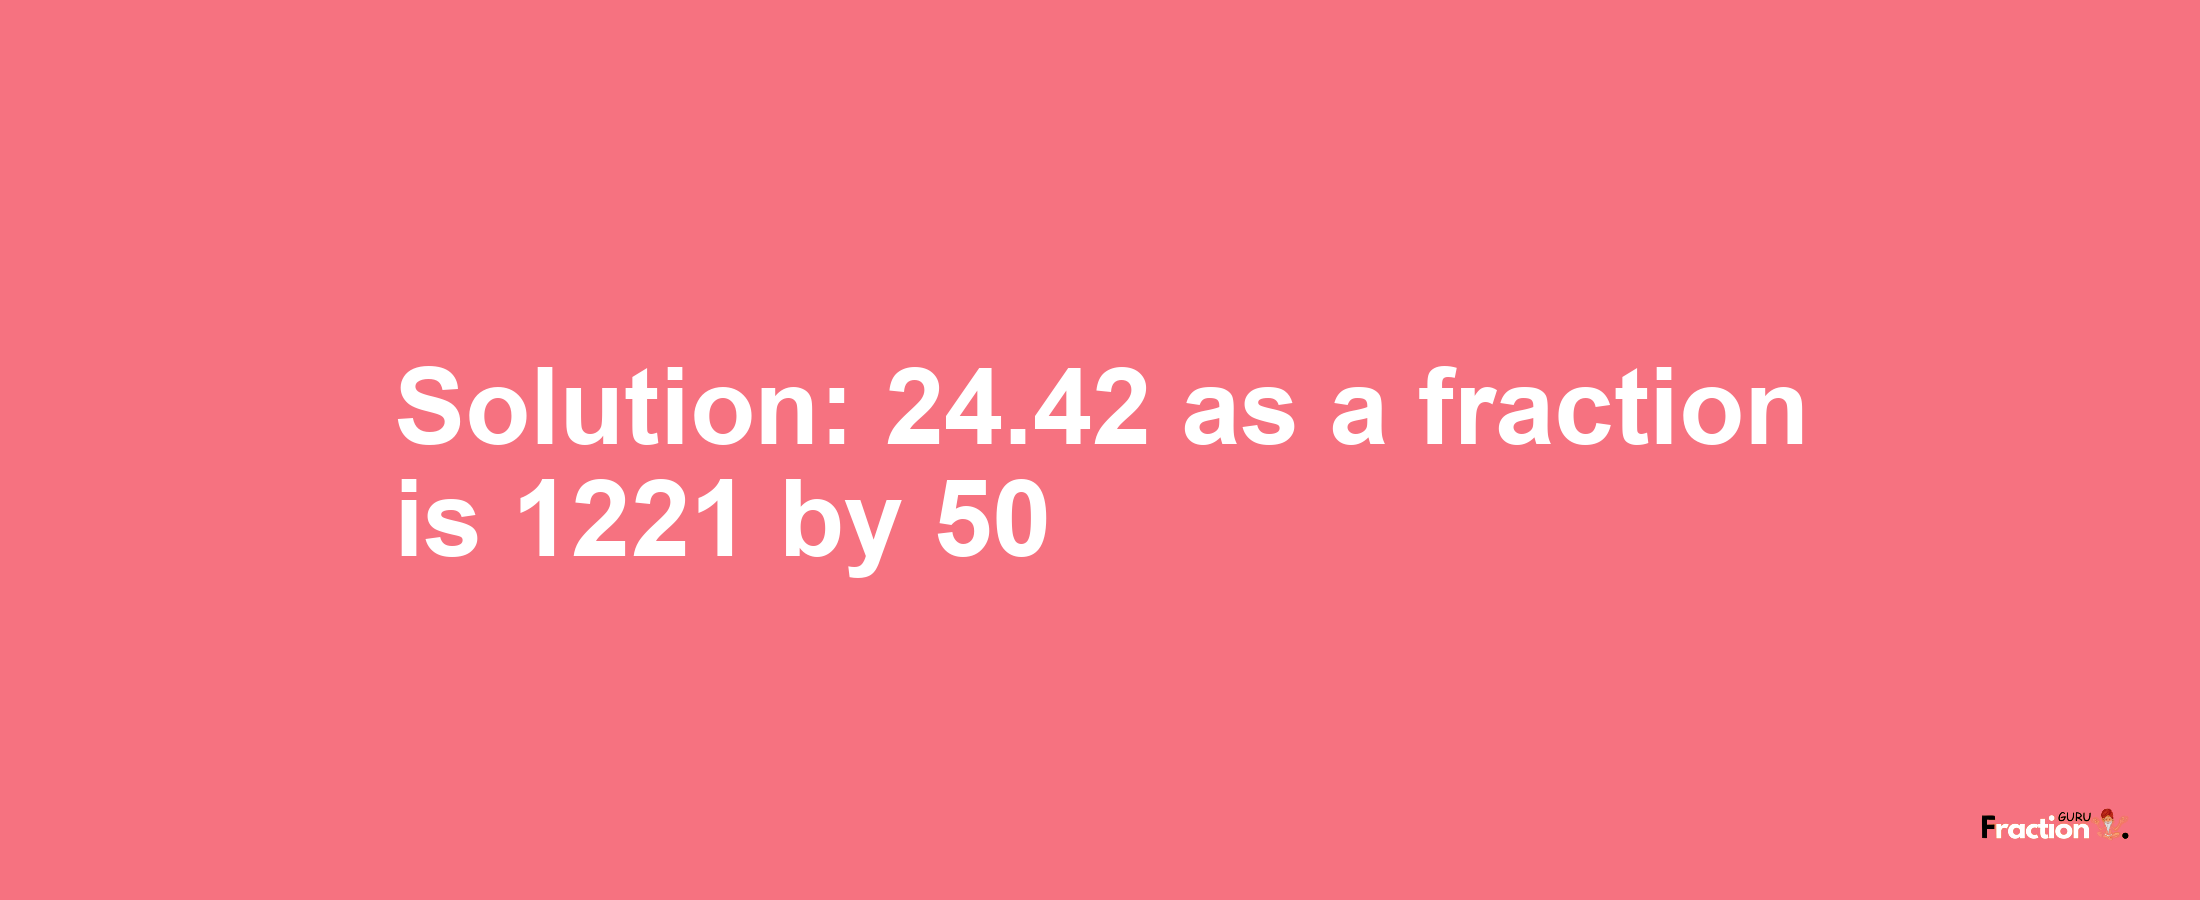 Solution:24.42 as a fraction is 1221/50